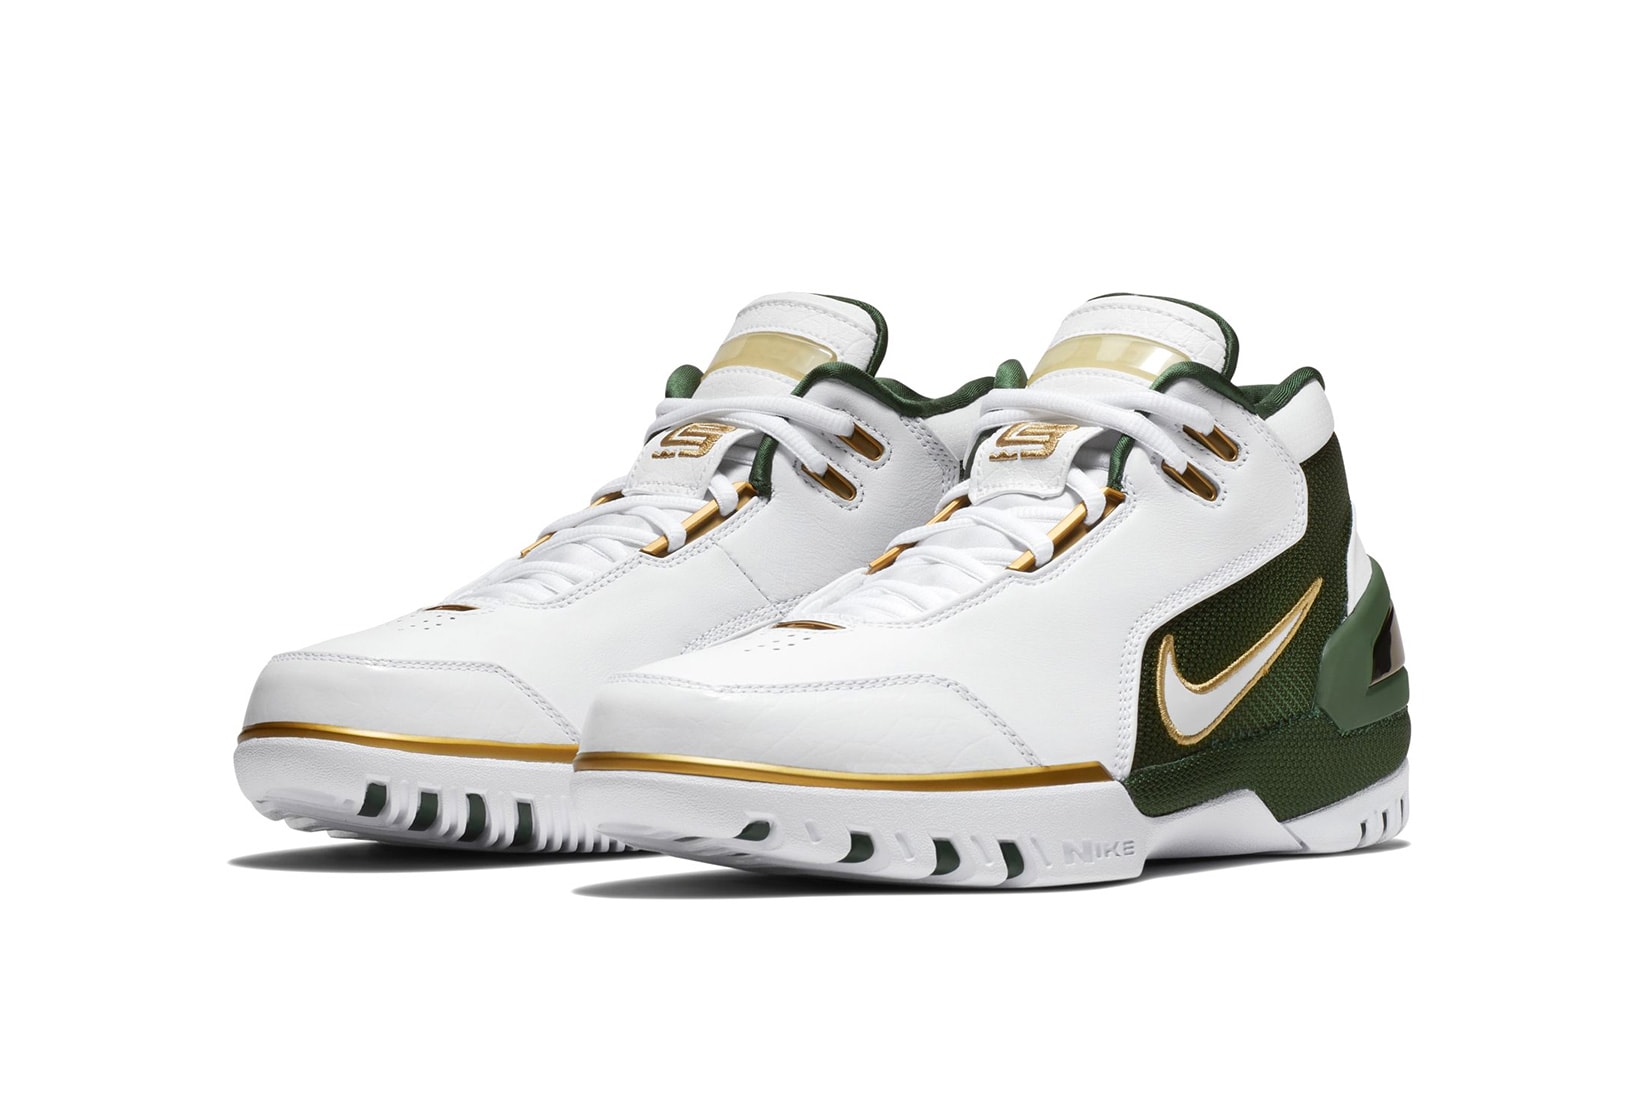 Nike Air Zoom Generation SVSM PE Official Images release date may 2018 nike basketball lebron james footwear